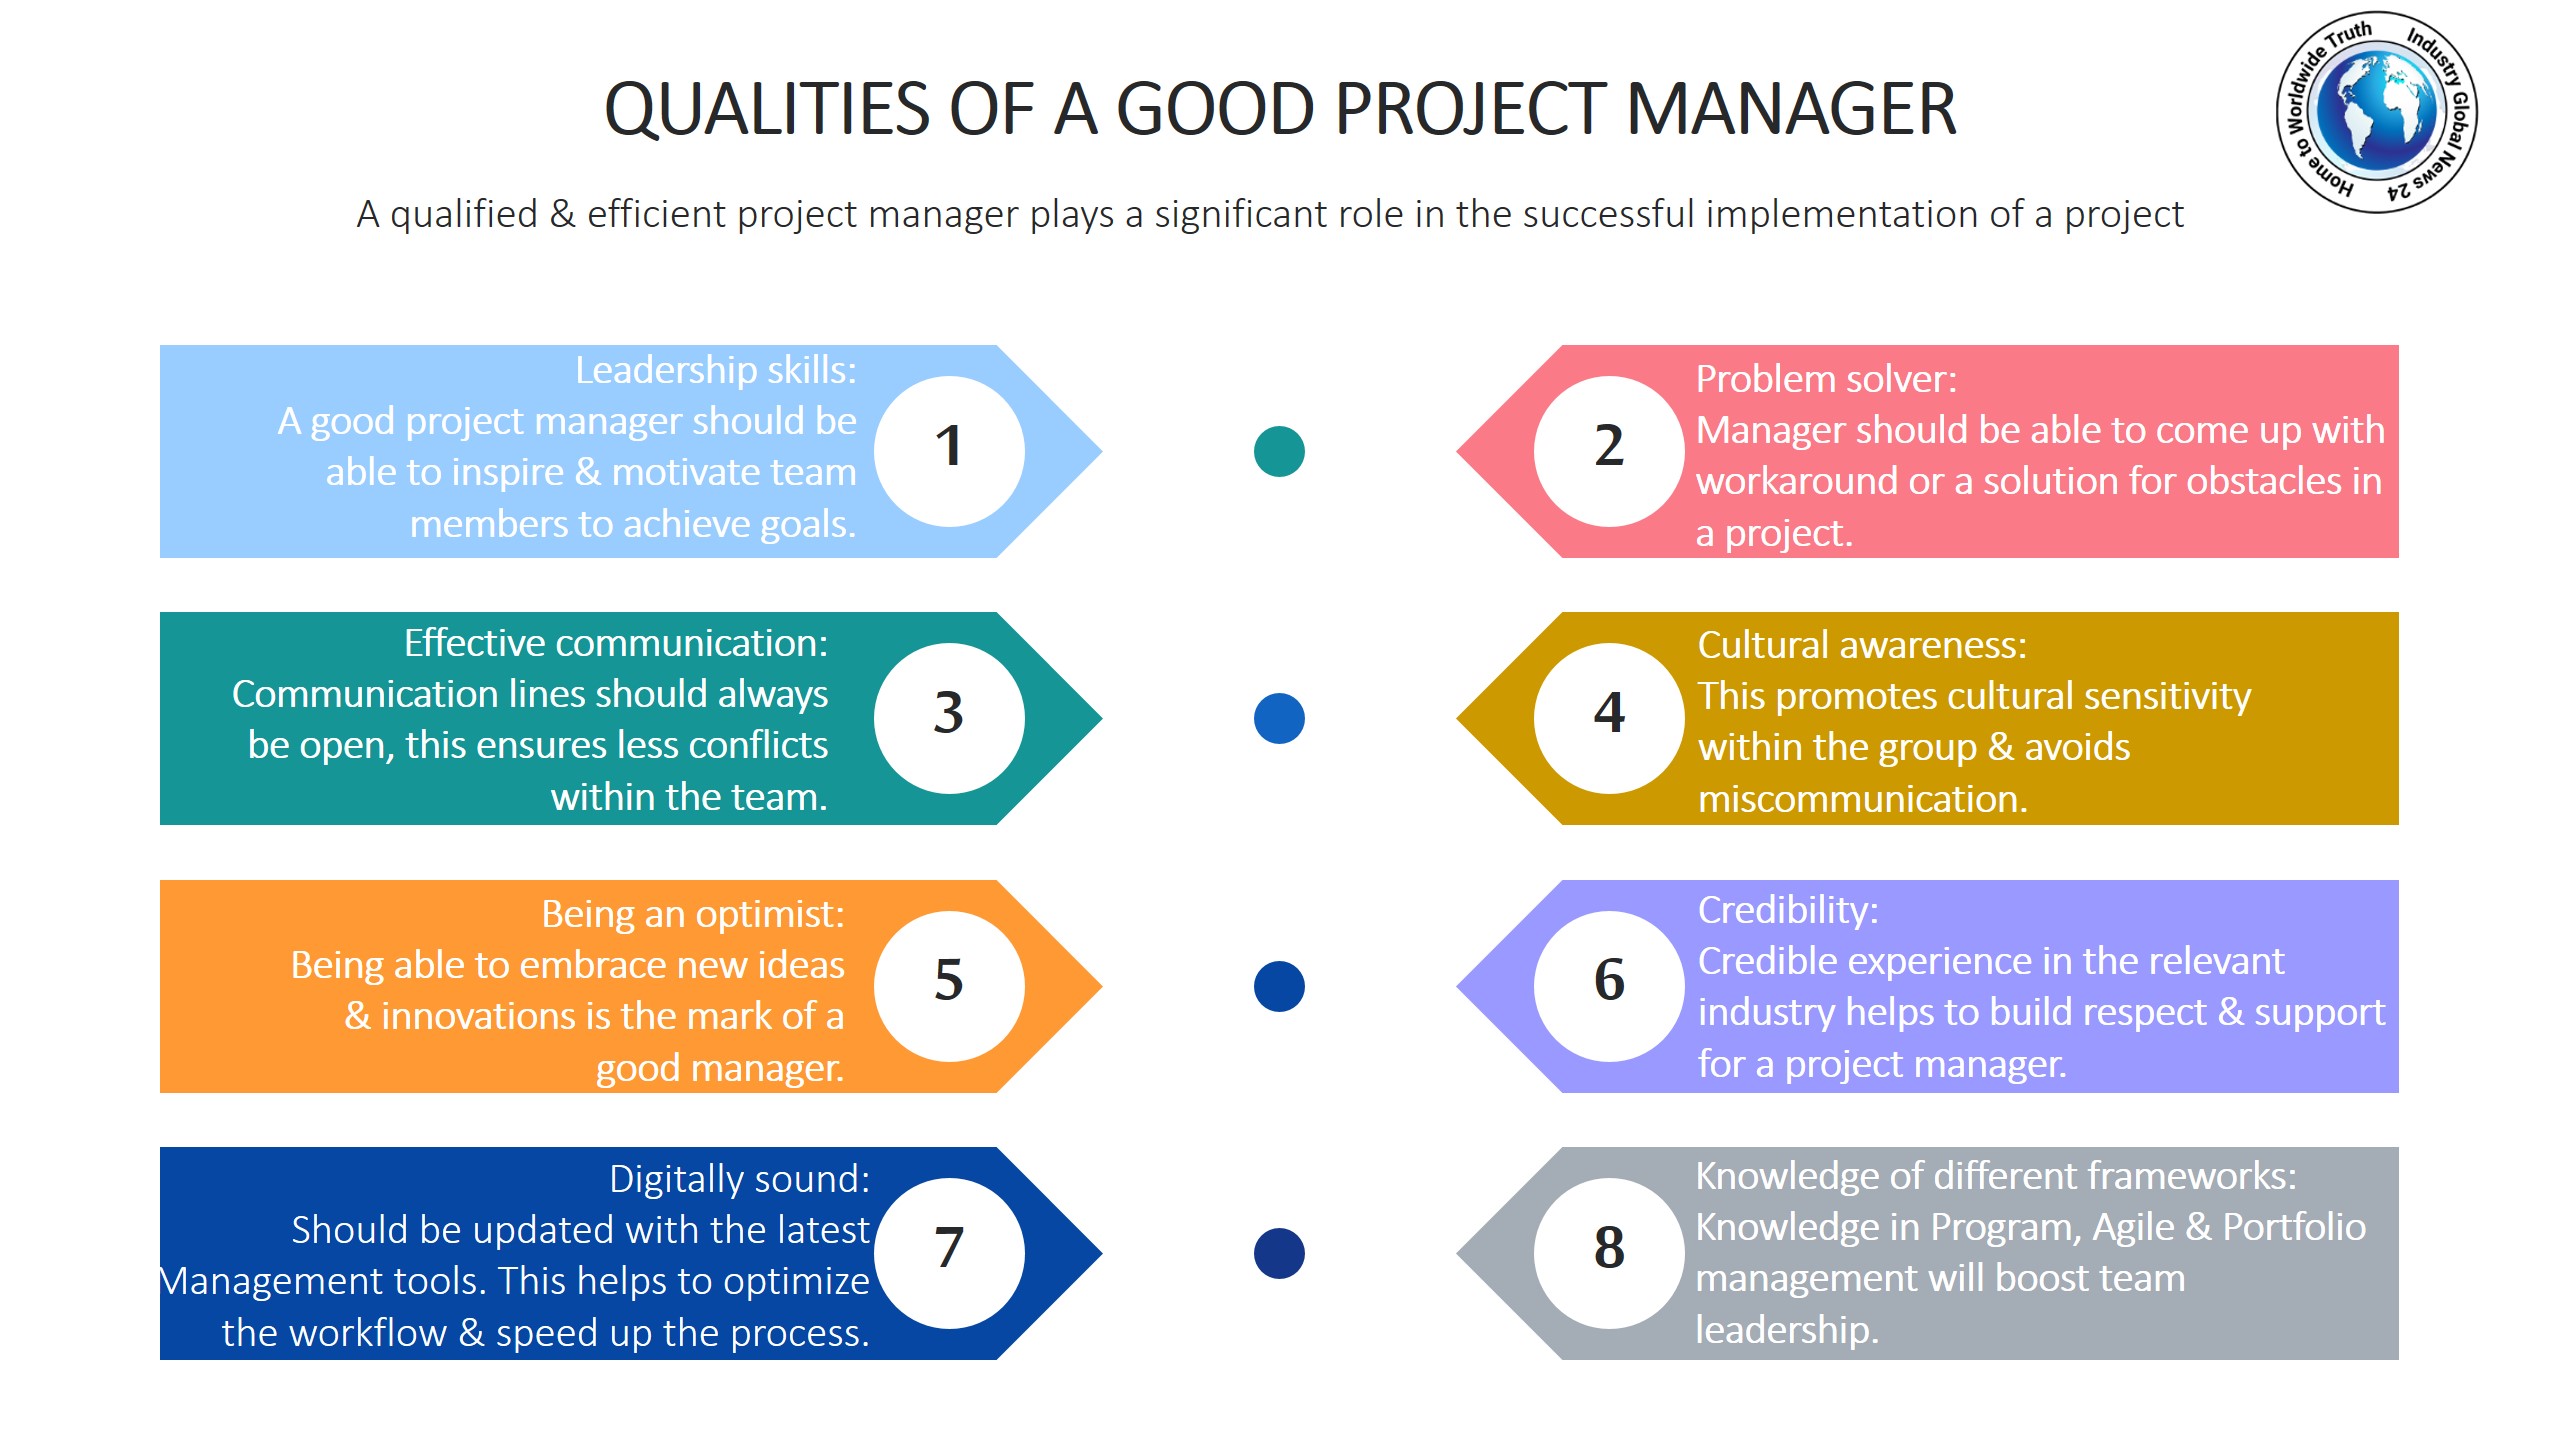 Qualities of a good project manager